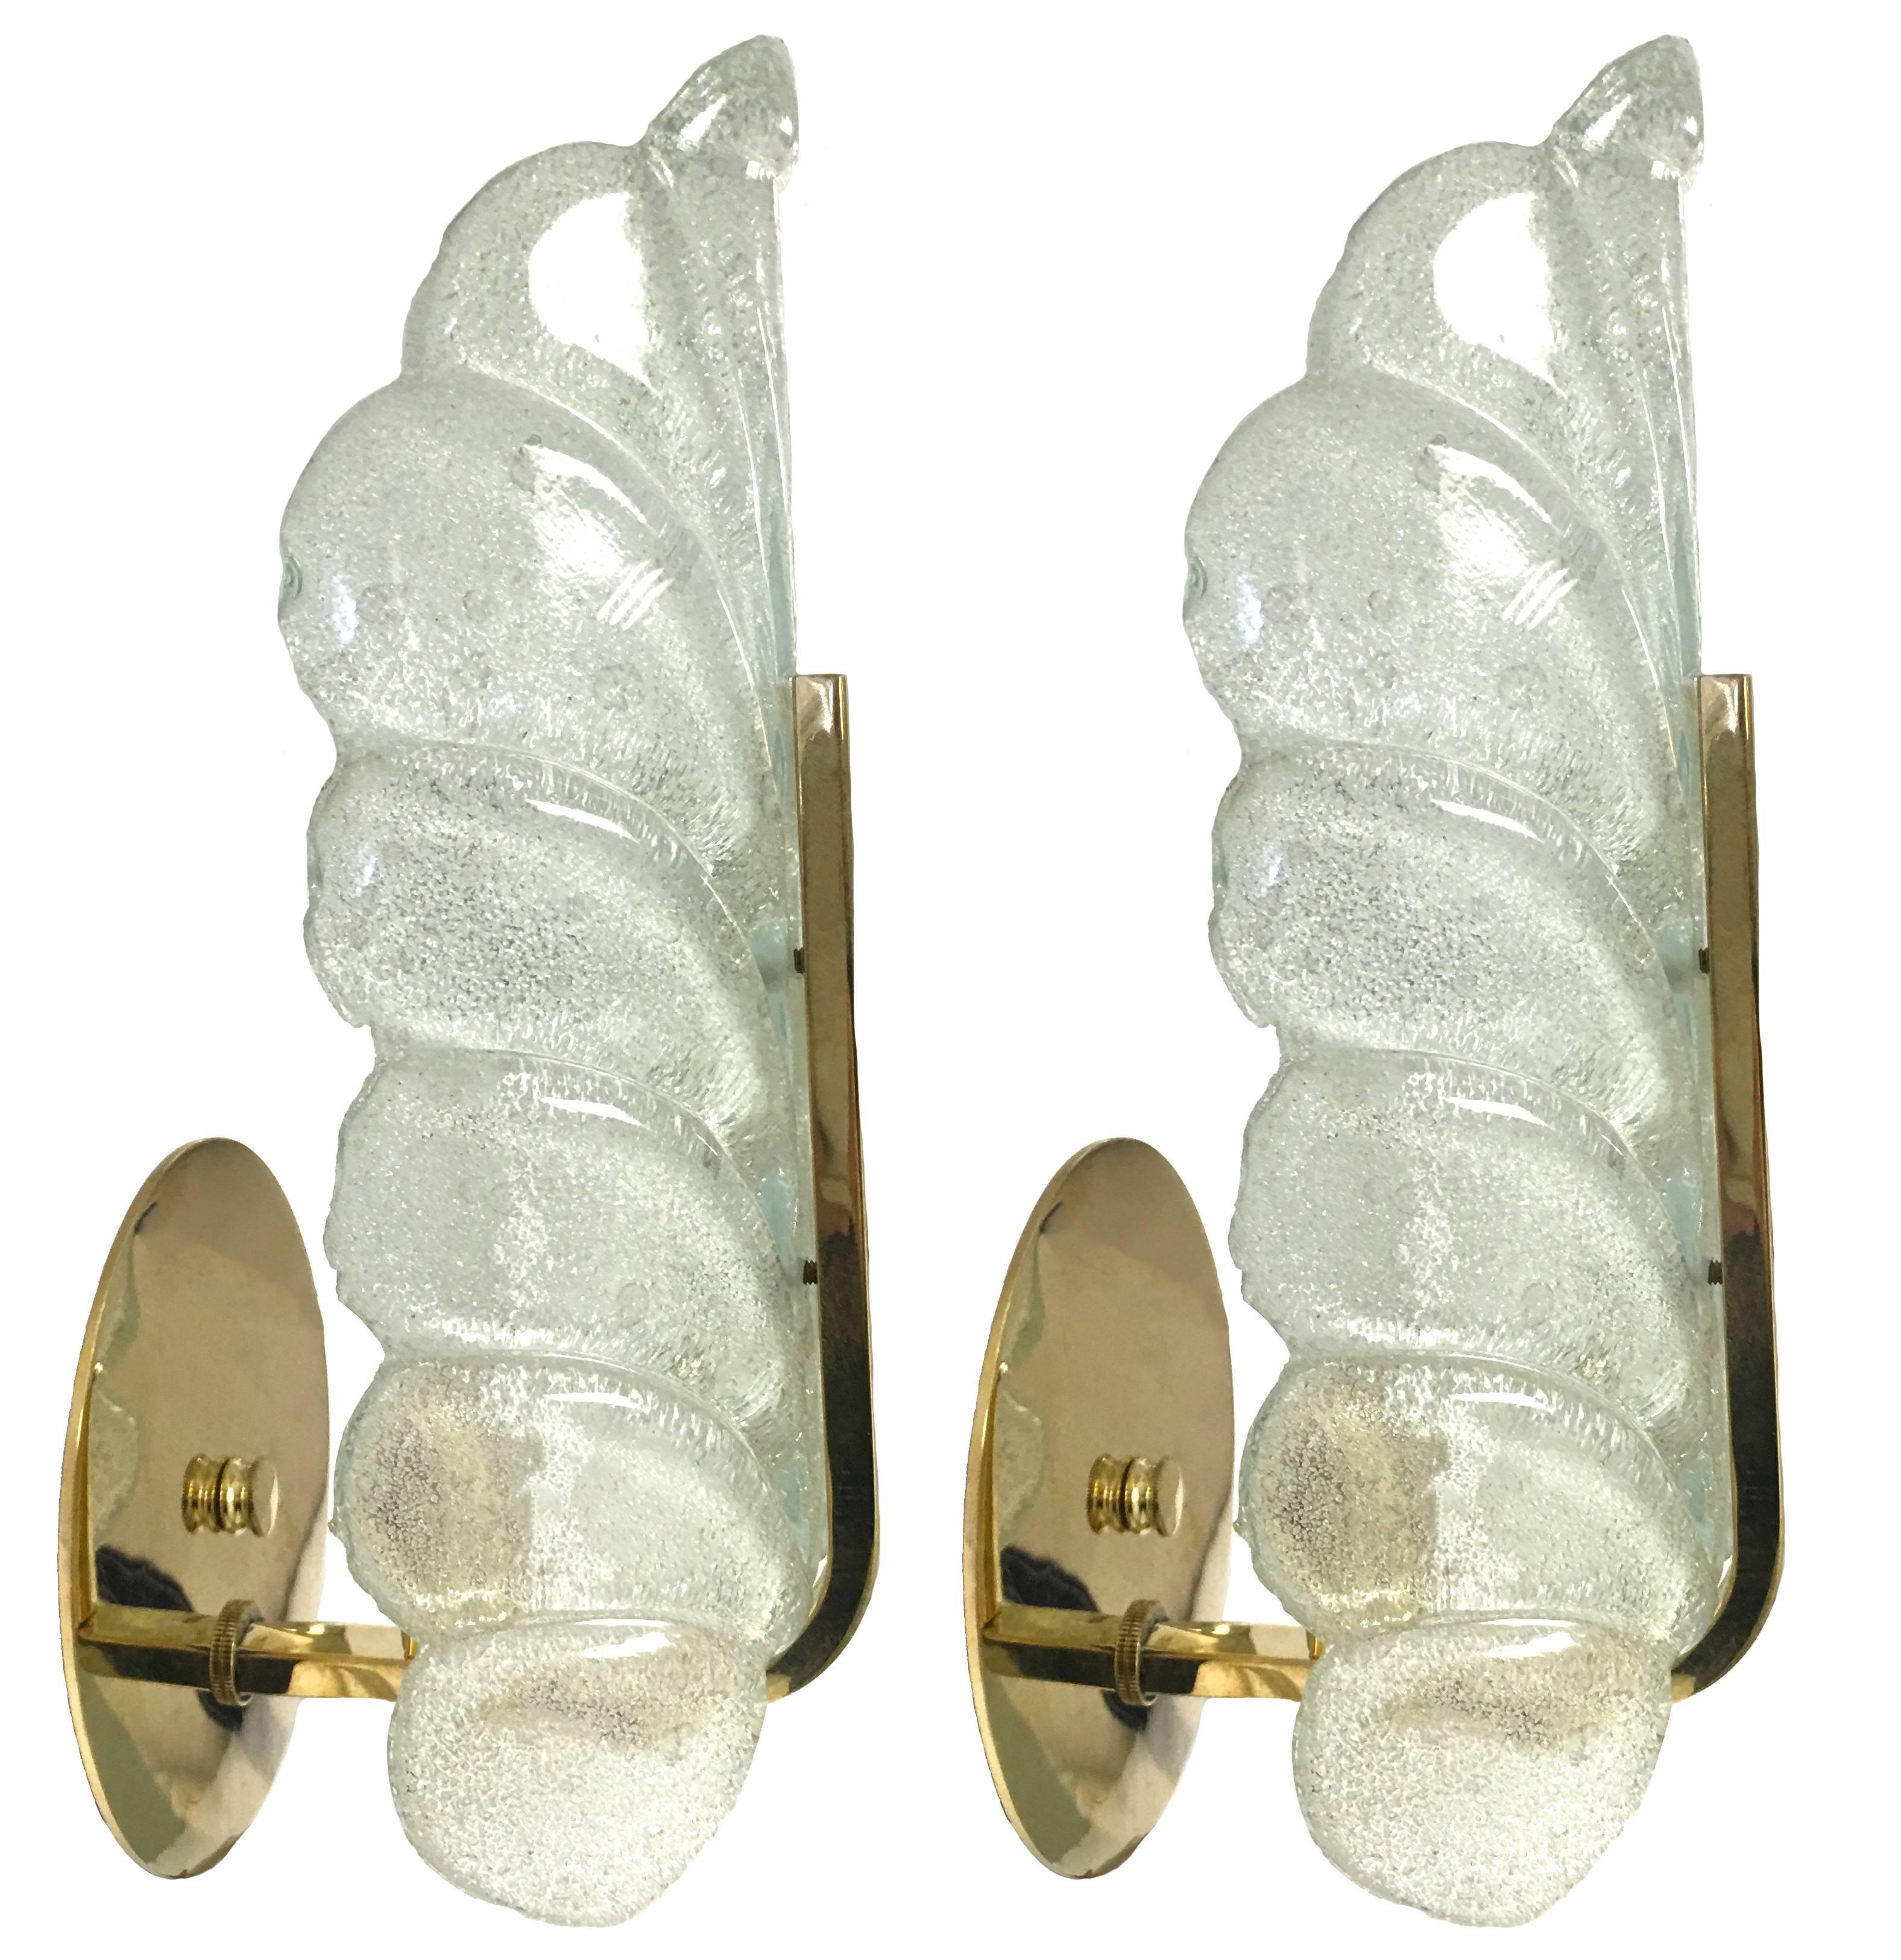 Pair of 1960s leaf sconces by Carl Fagerlund for Orrefors. Clear glass leaf with texturized sandblasted interior finish. Polished brass fittings and backplates. Backplate is 5